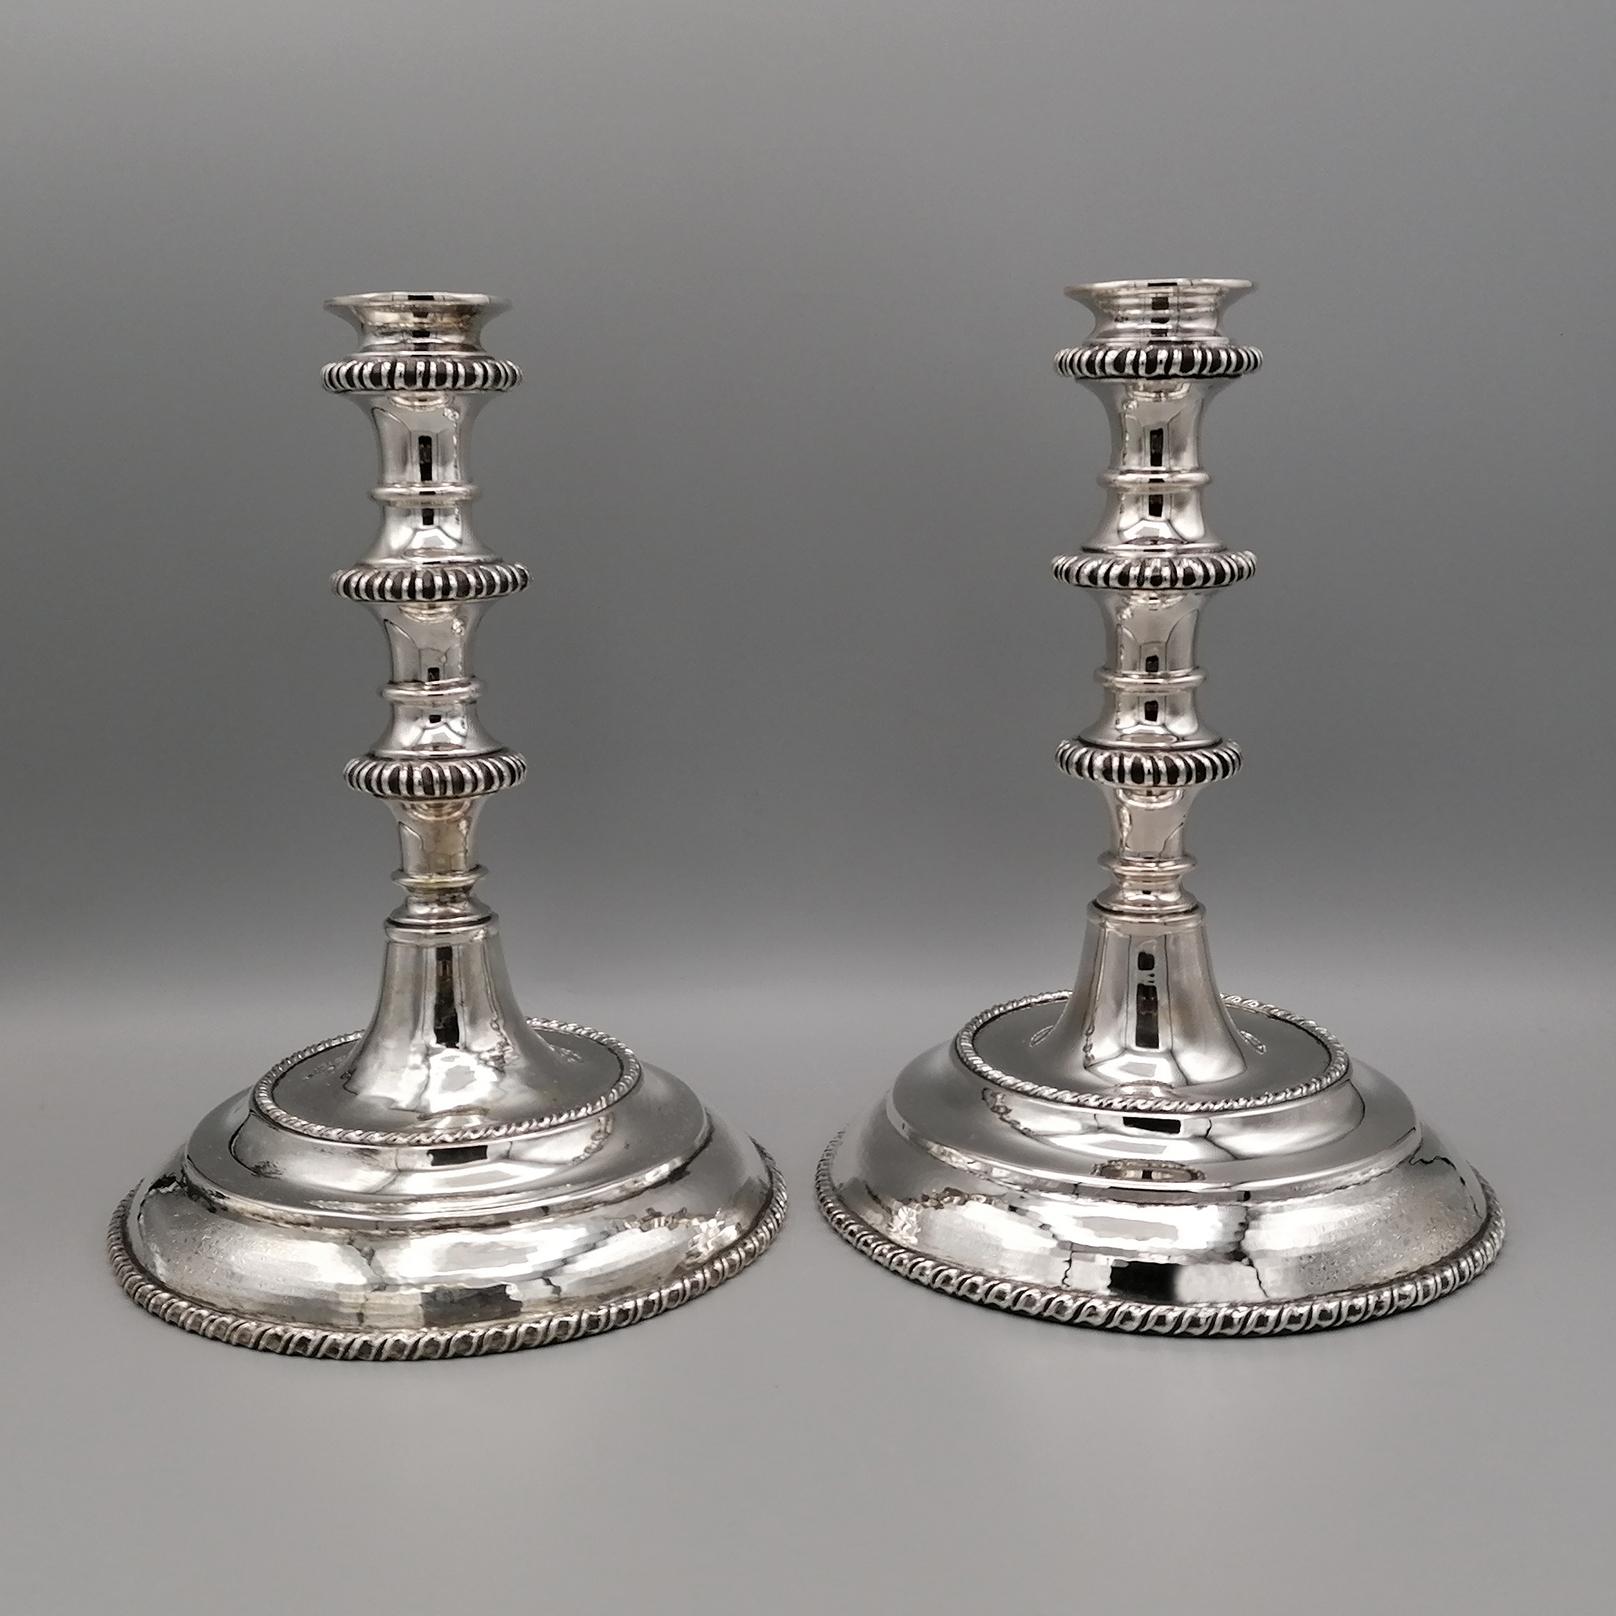 Pair of solid silver candlesticks made in Italy in San Marco (Venetian) style completely handmade.
The base is round and hand-hammered with
two San marco welted edges.
The stem is shaped with a triple border that ends with the candle holder. 
By